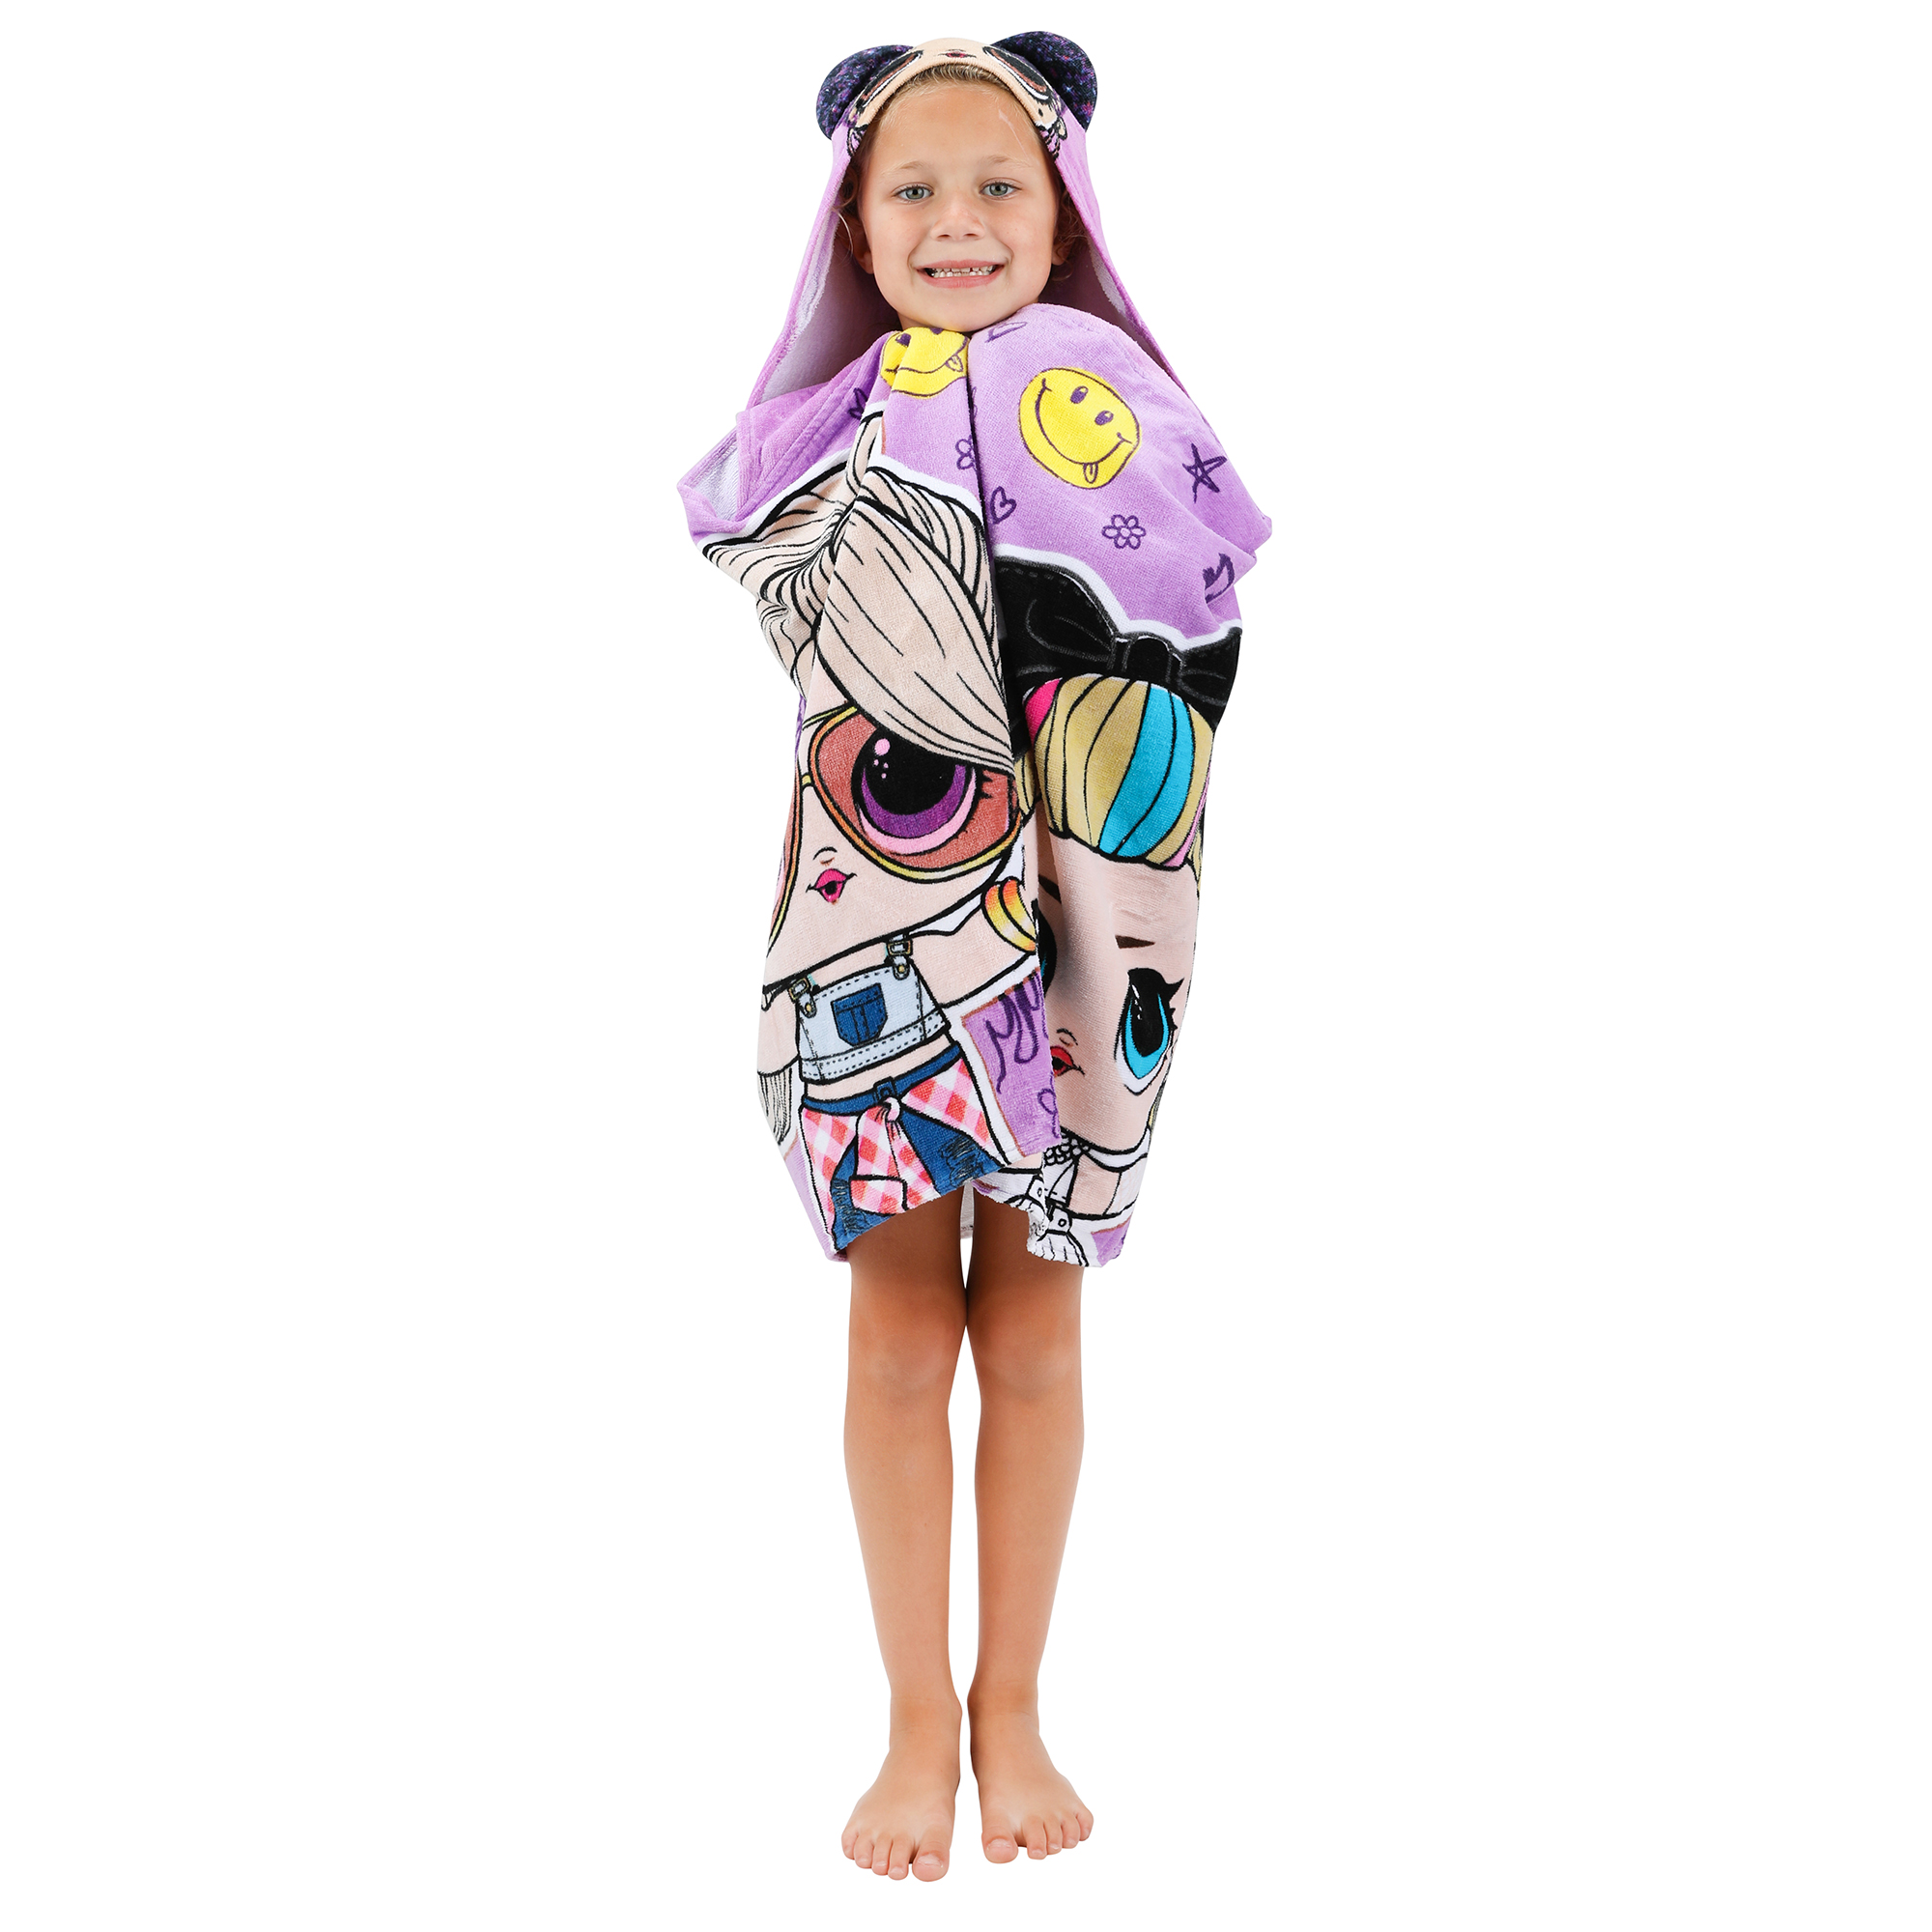 LOL Surprise Kids Purple Queen Hooded Towel, Cotton, Purple, MGA - image 8 of 10